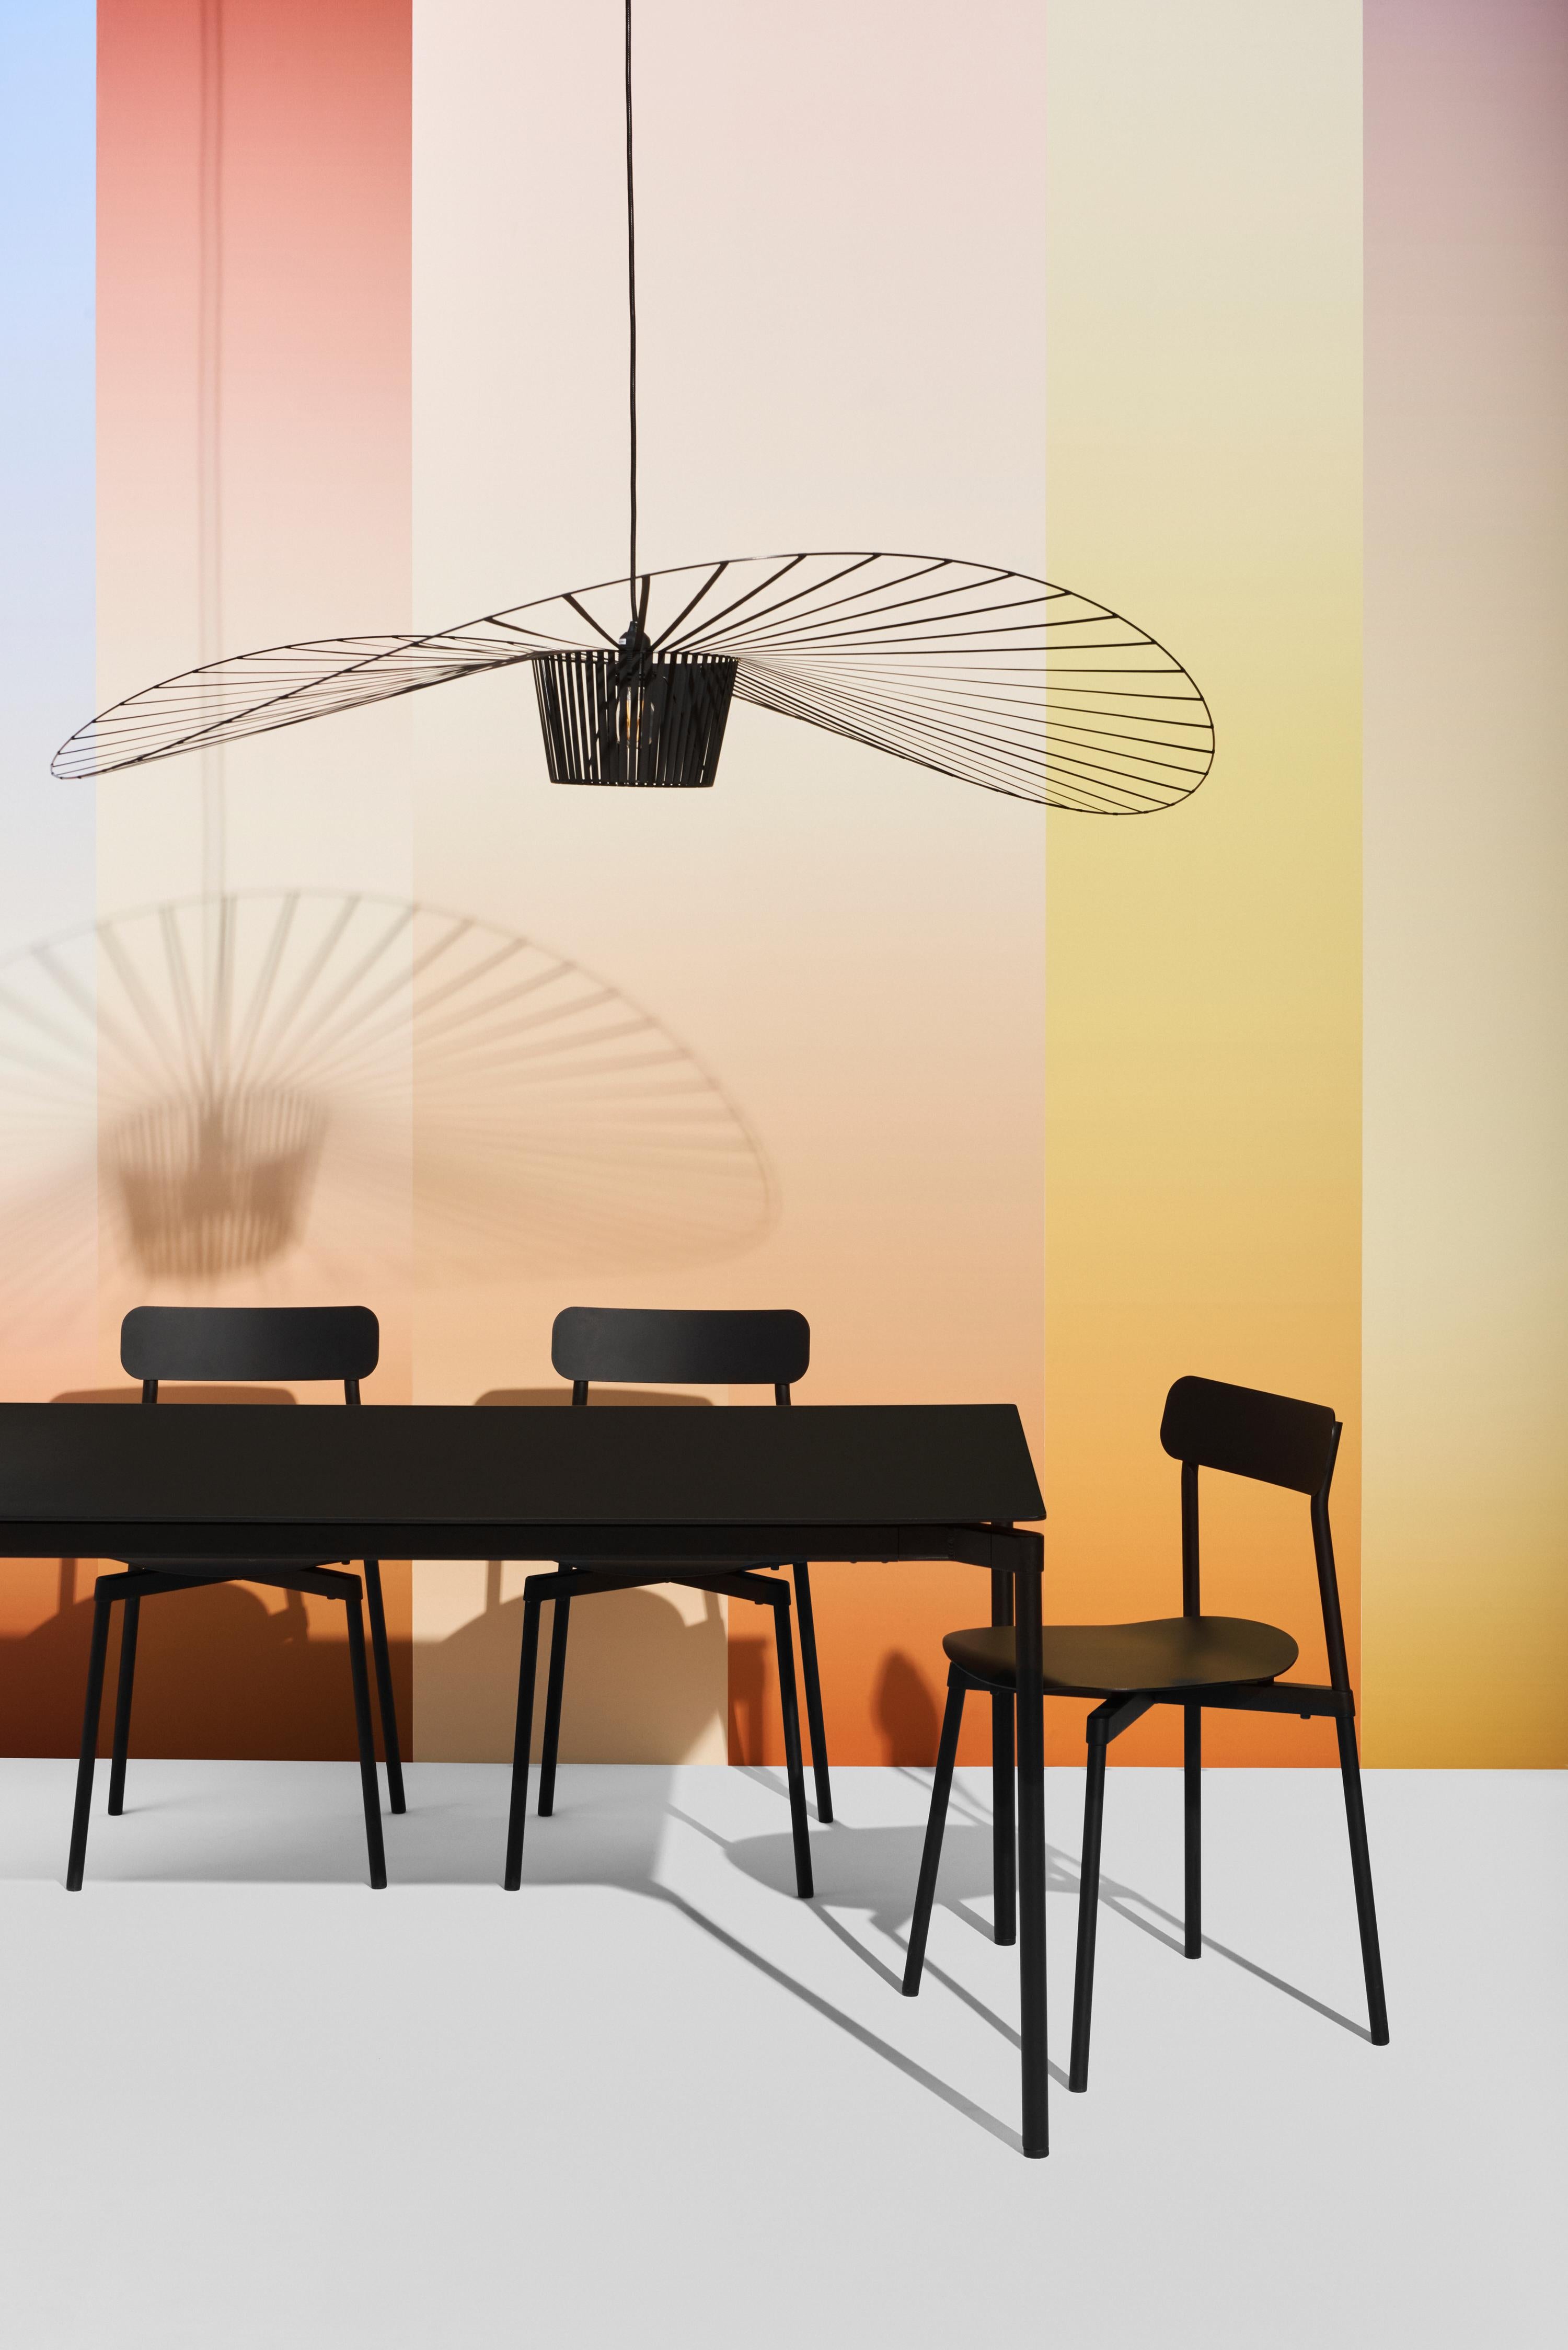 The Vertigo pendant light is an icon of Petite Friture. Created by the designer Constance Guisset it aroused the enthusiasm of design professionals. Recognized very early by Rossana Orlandi, this large design chandelier has incorporated an anthology